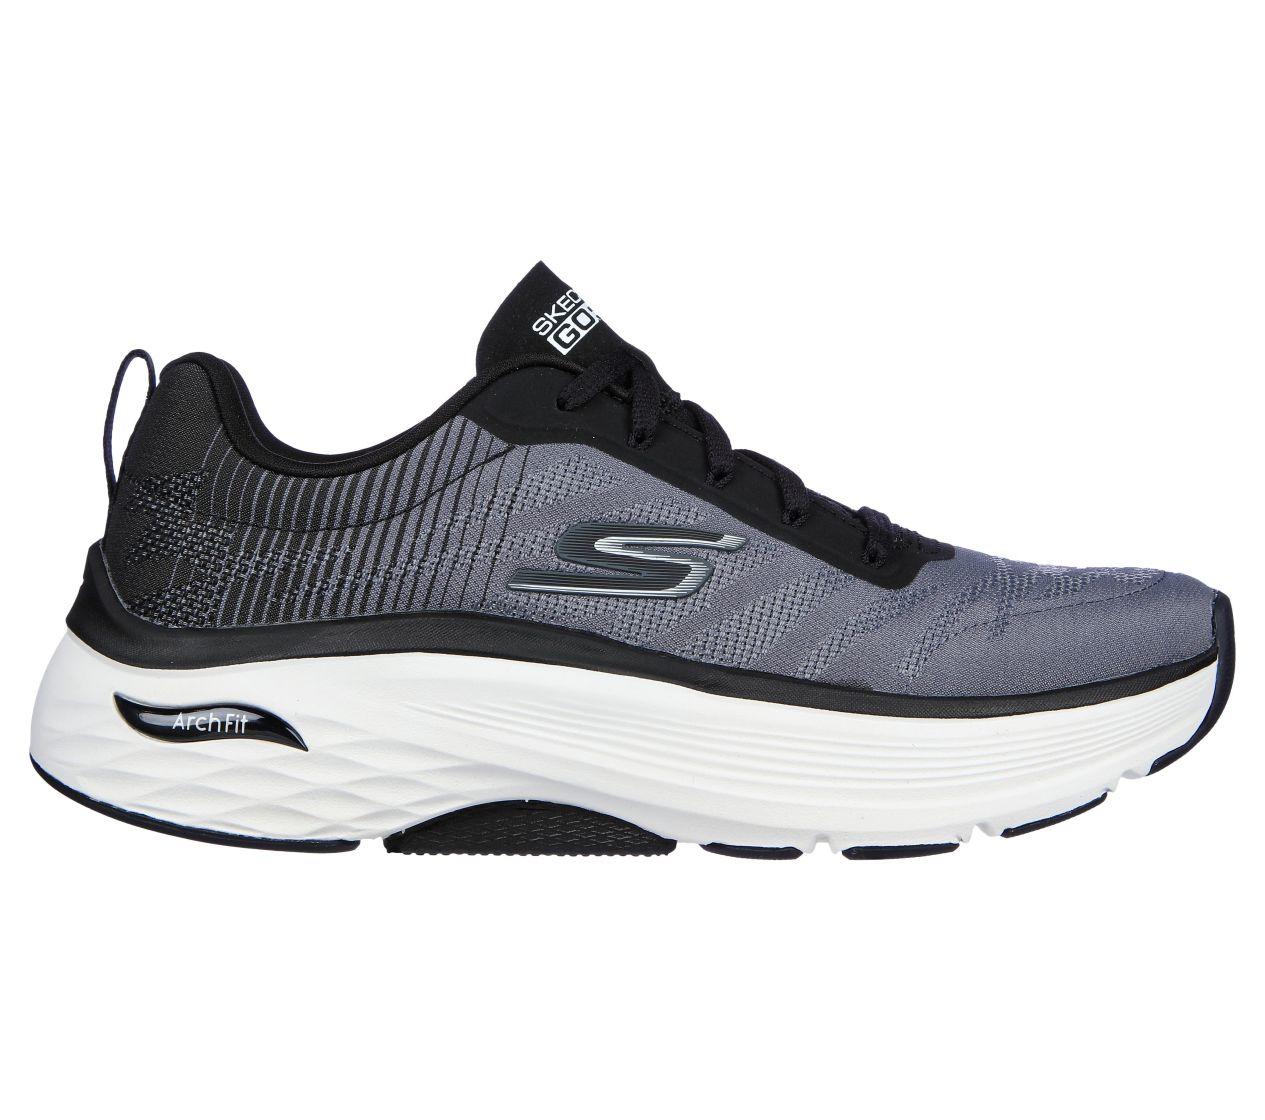 Skechers 128312/BKW Max cushioning Arch Fit - Delphi